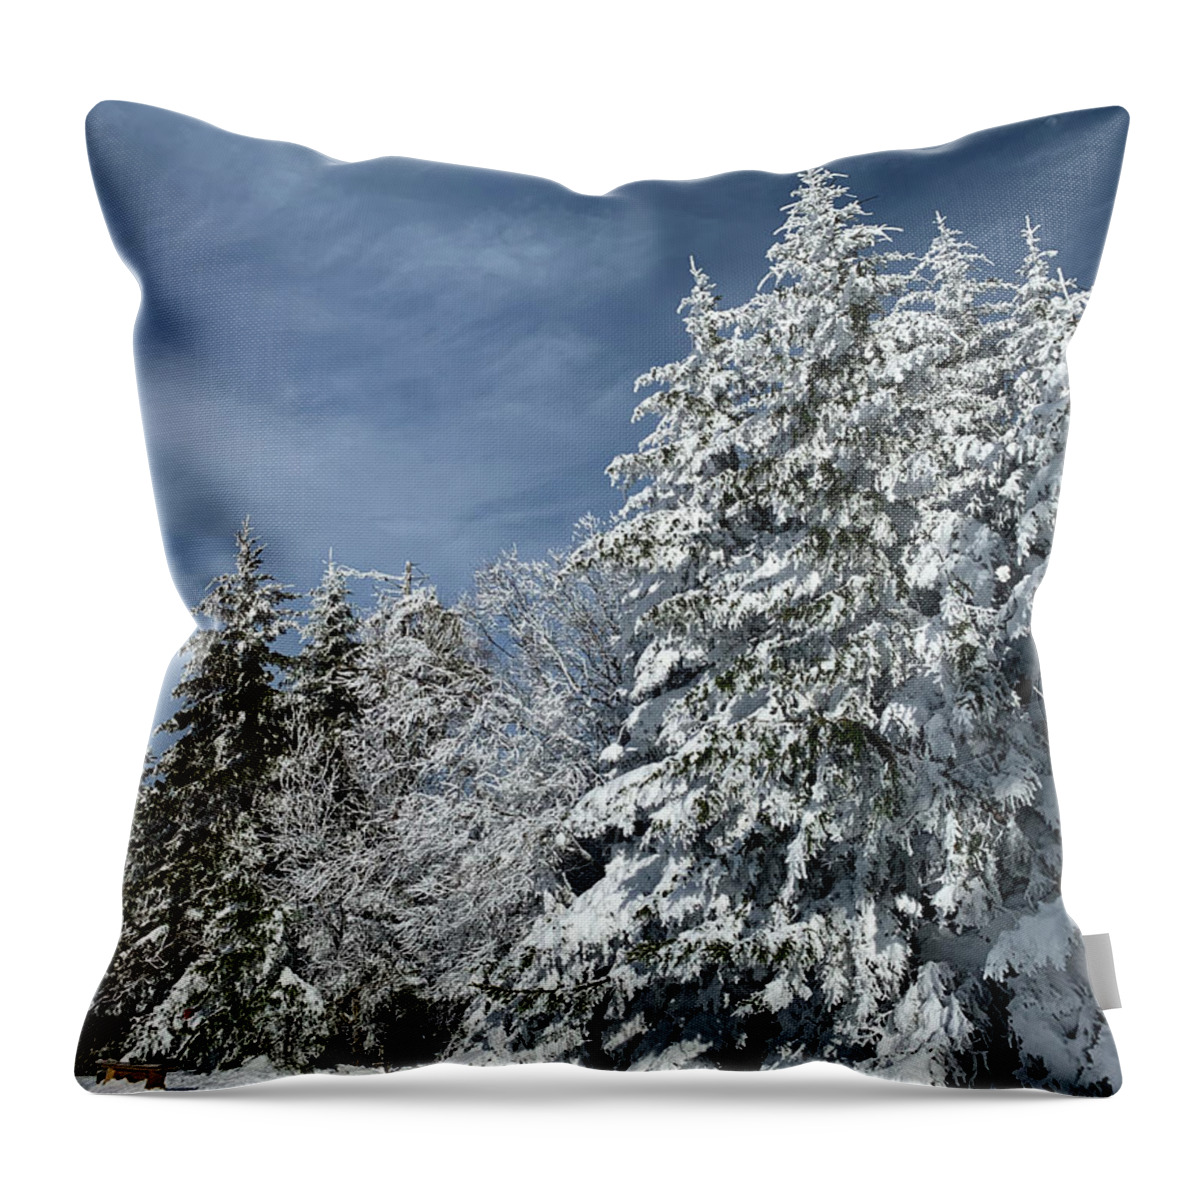  Throw Pillow featuring the photograph Winter Wonderland by Annamaria Frost